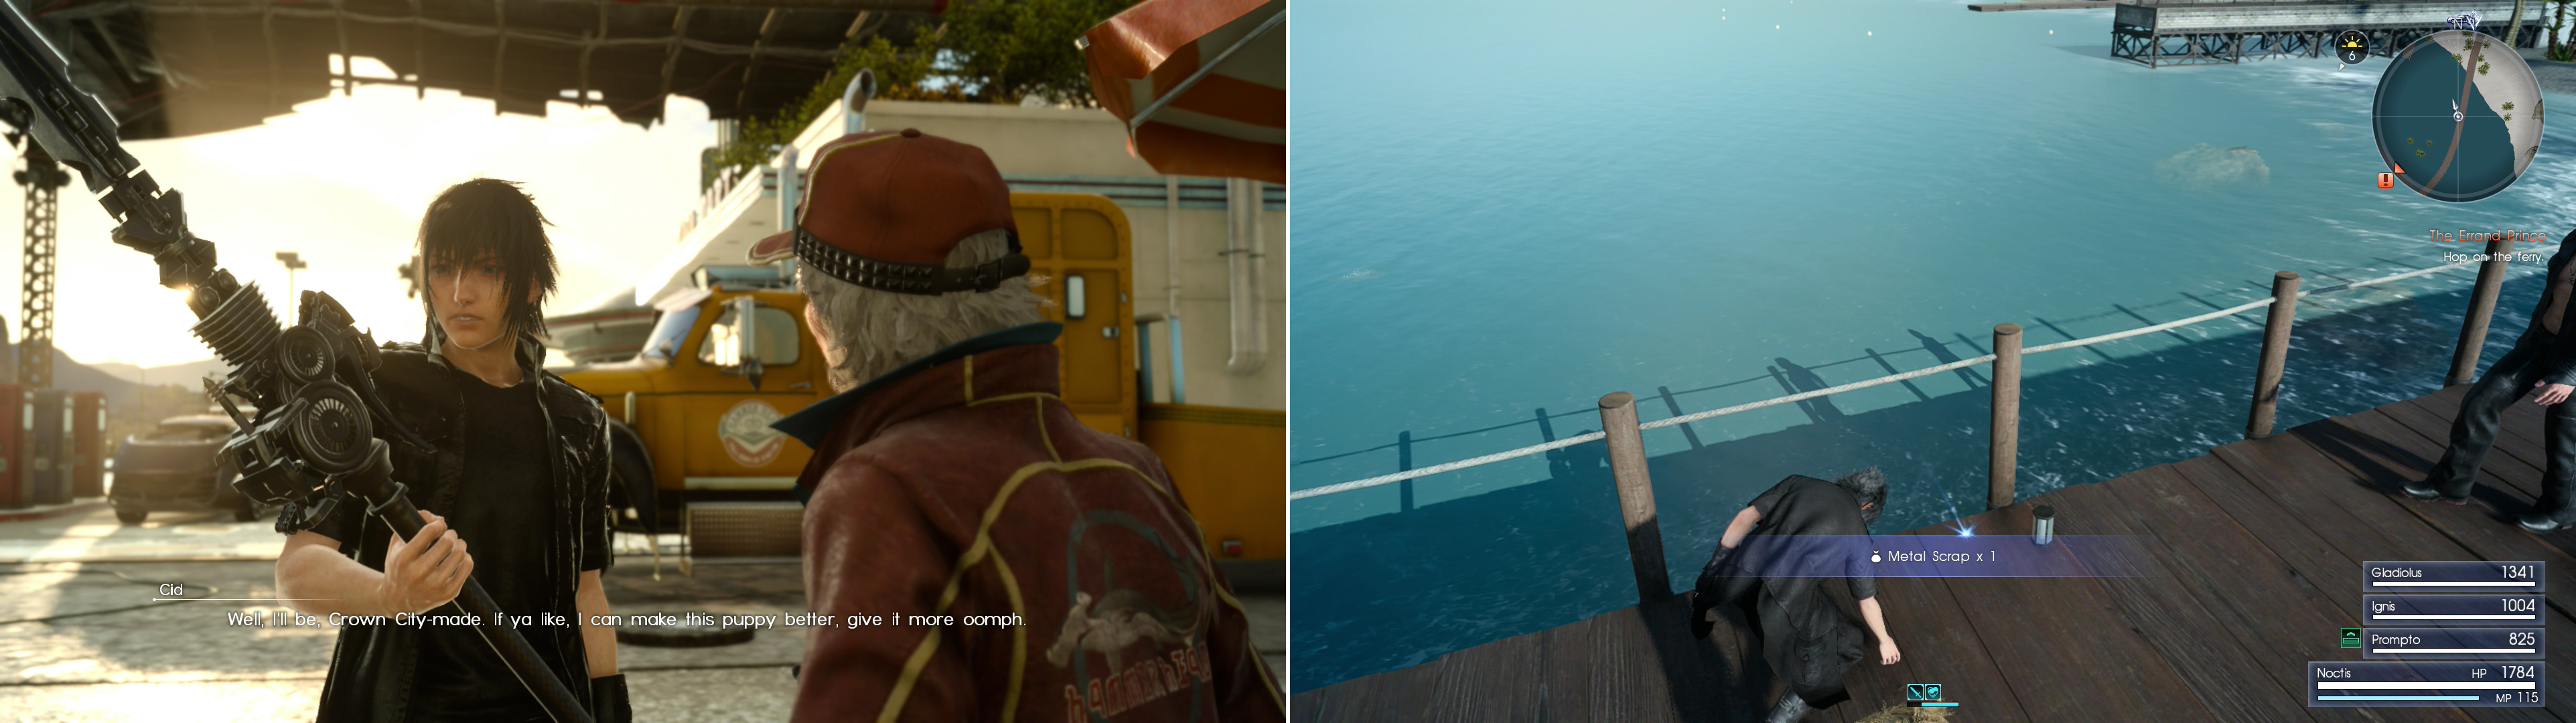 Bring the Drain Lance to Cid (left) and he’ll offer to upgrade the weapon for you if you bring him a component. Such a component - a Metal Scrap - can be found on Galdin Quay’s pier (right).